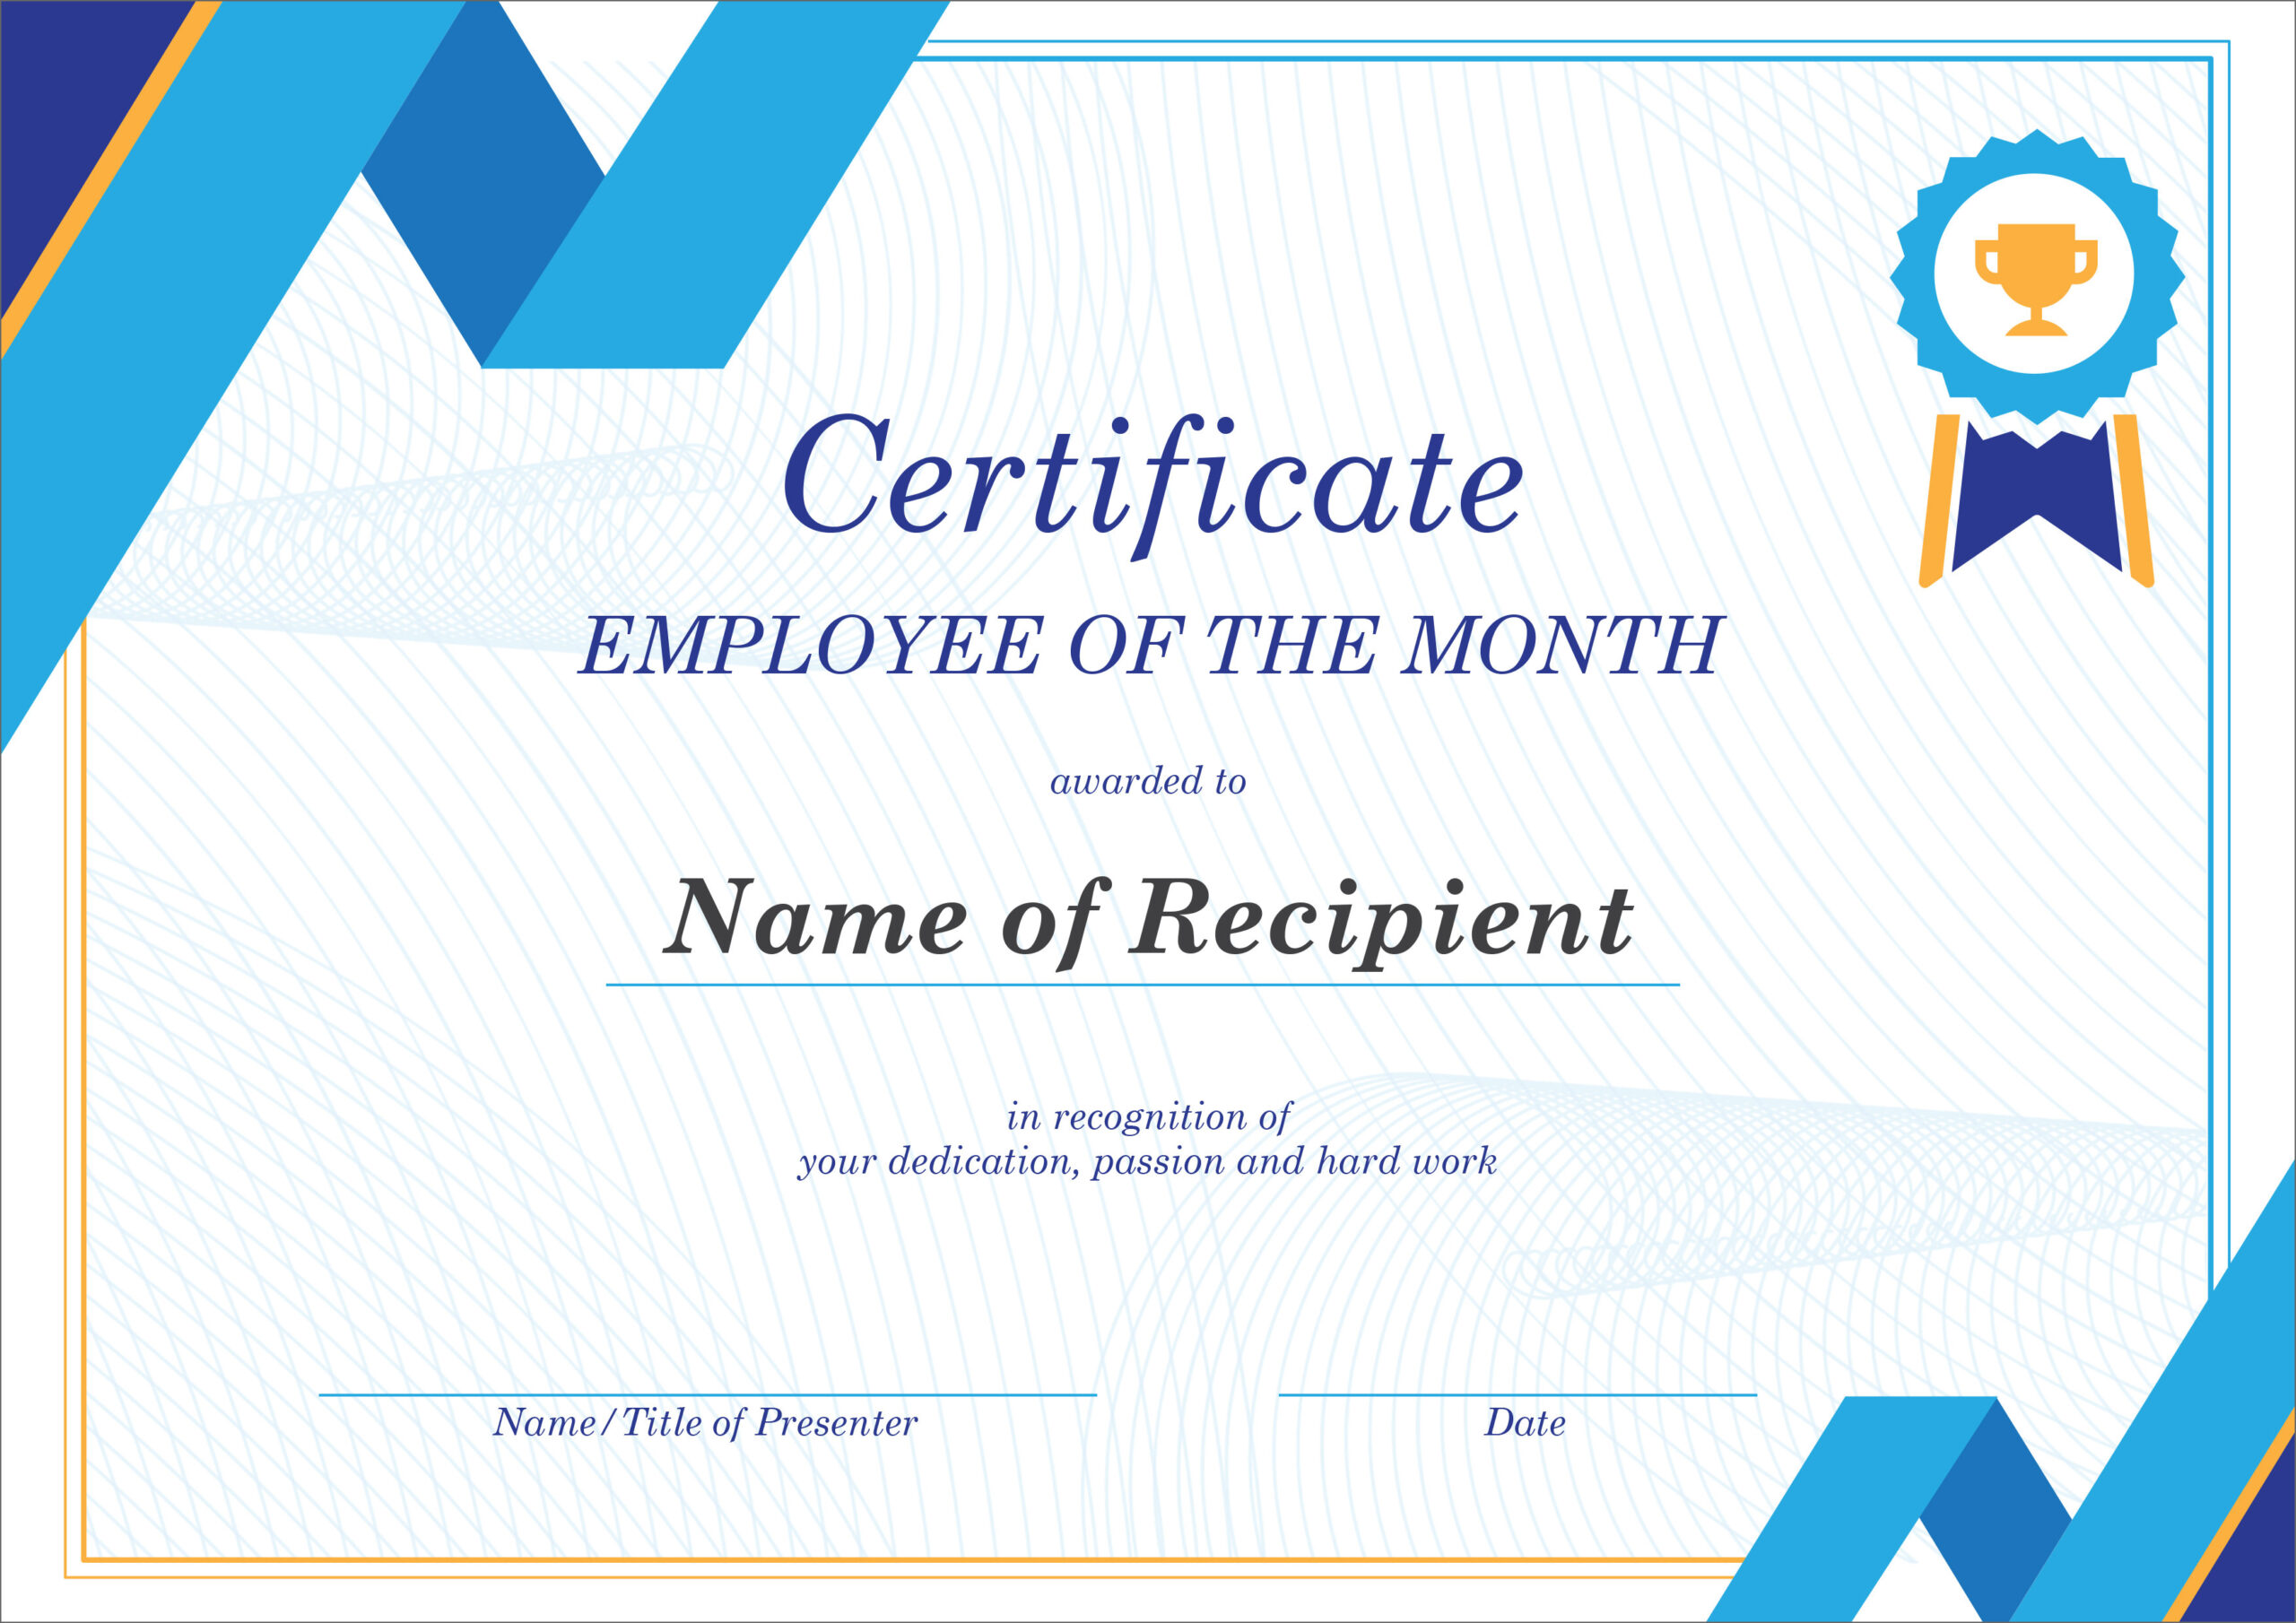 50 Free Creative Blank Certificate Templates In Psd For Employee Of The Month Certificate Templates